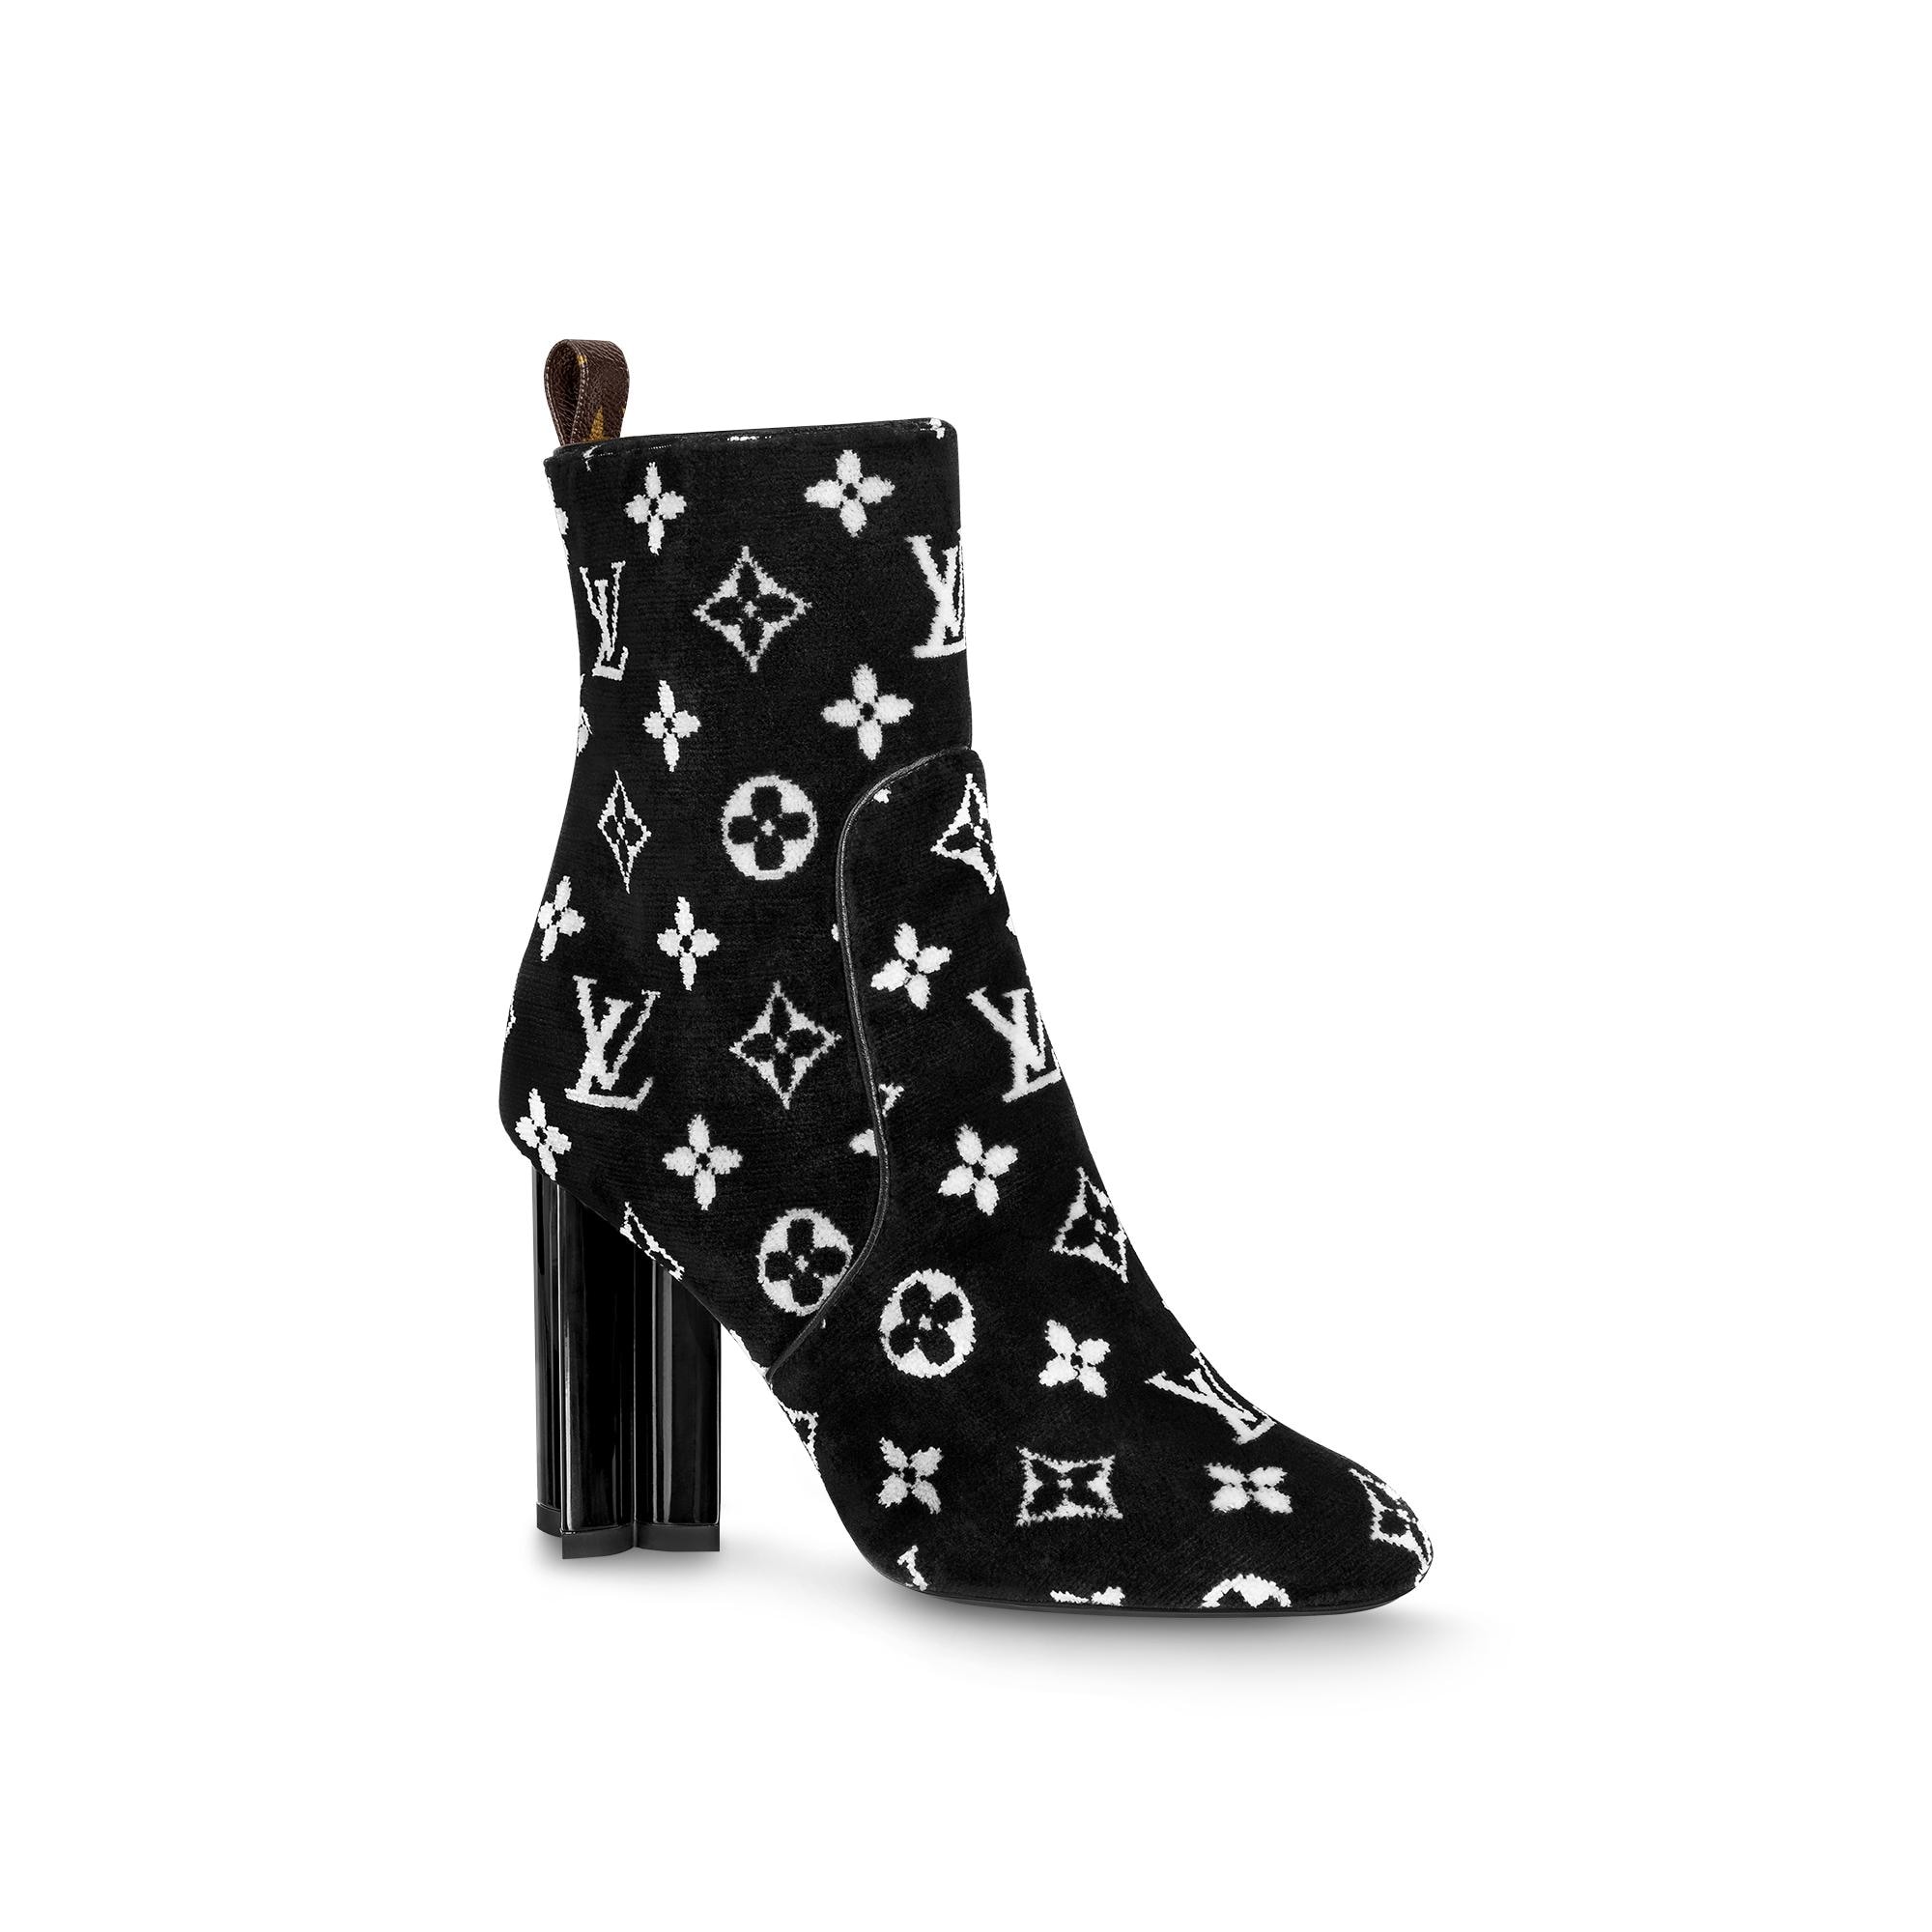 LOUIS VUITTON SILHOUETTE ANKLE BOOT  Louis vuitton shoes, Louis vuitton  shoes heels, Louis vuitton boots